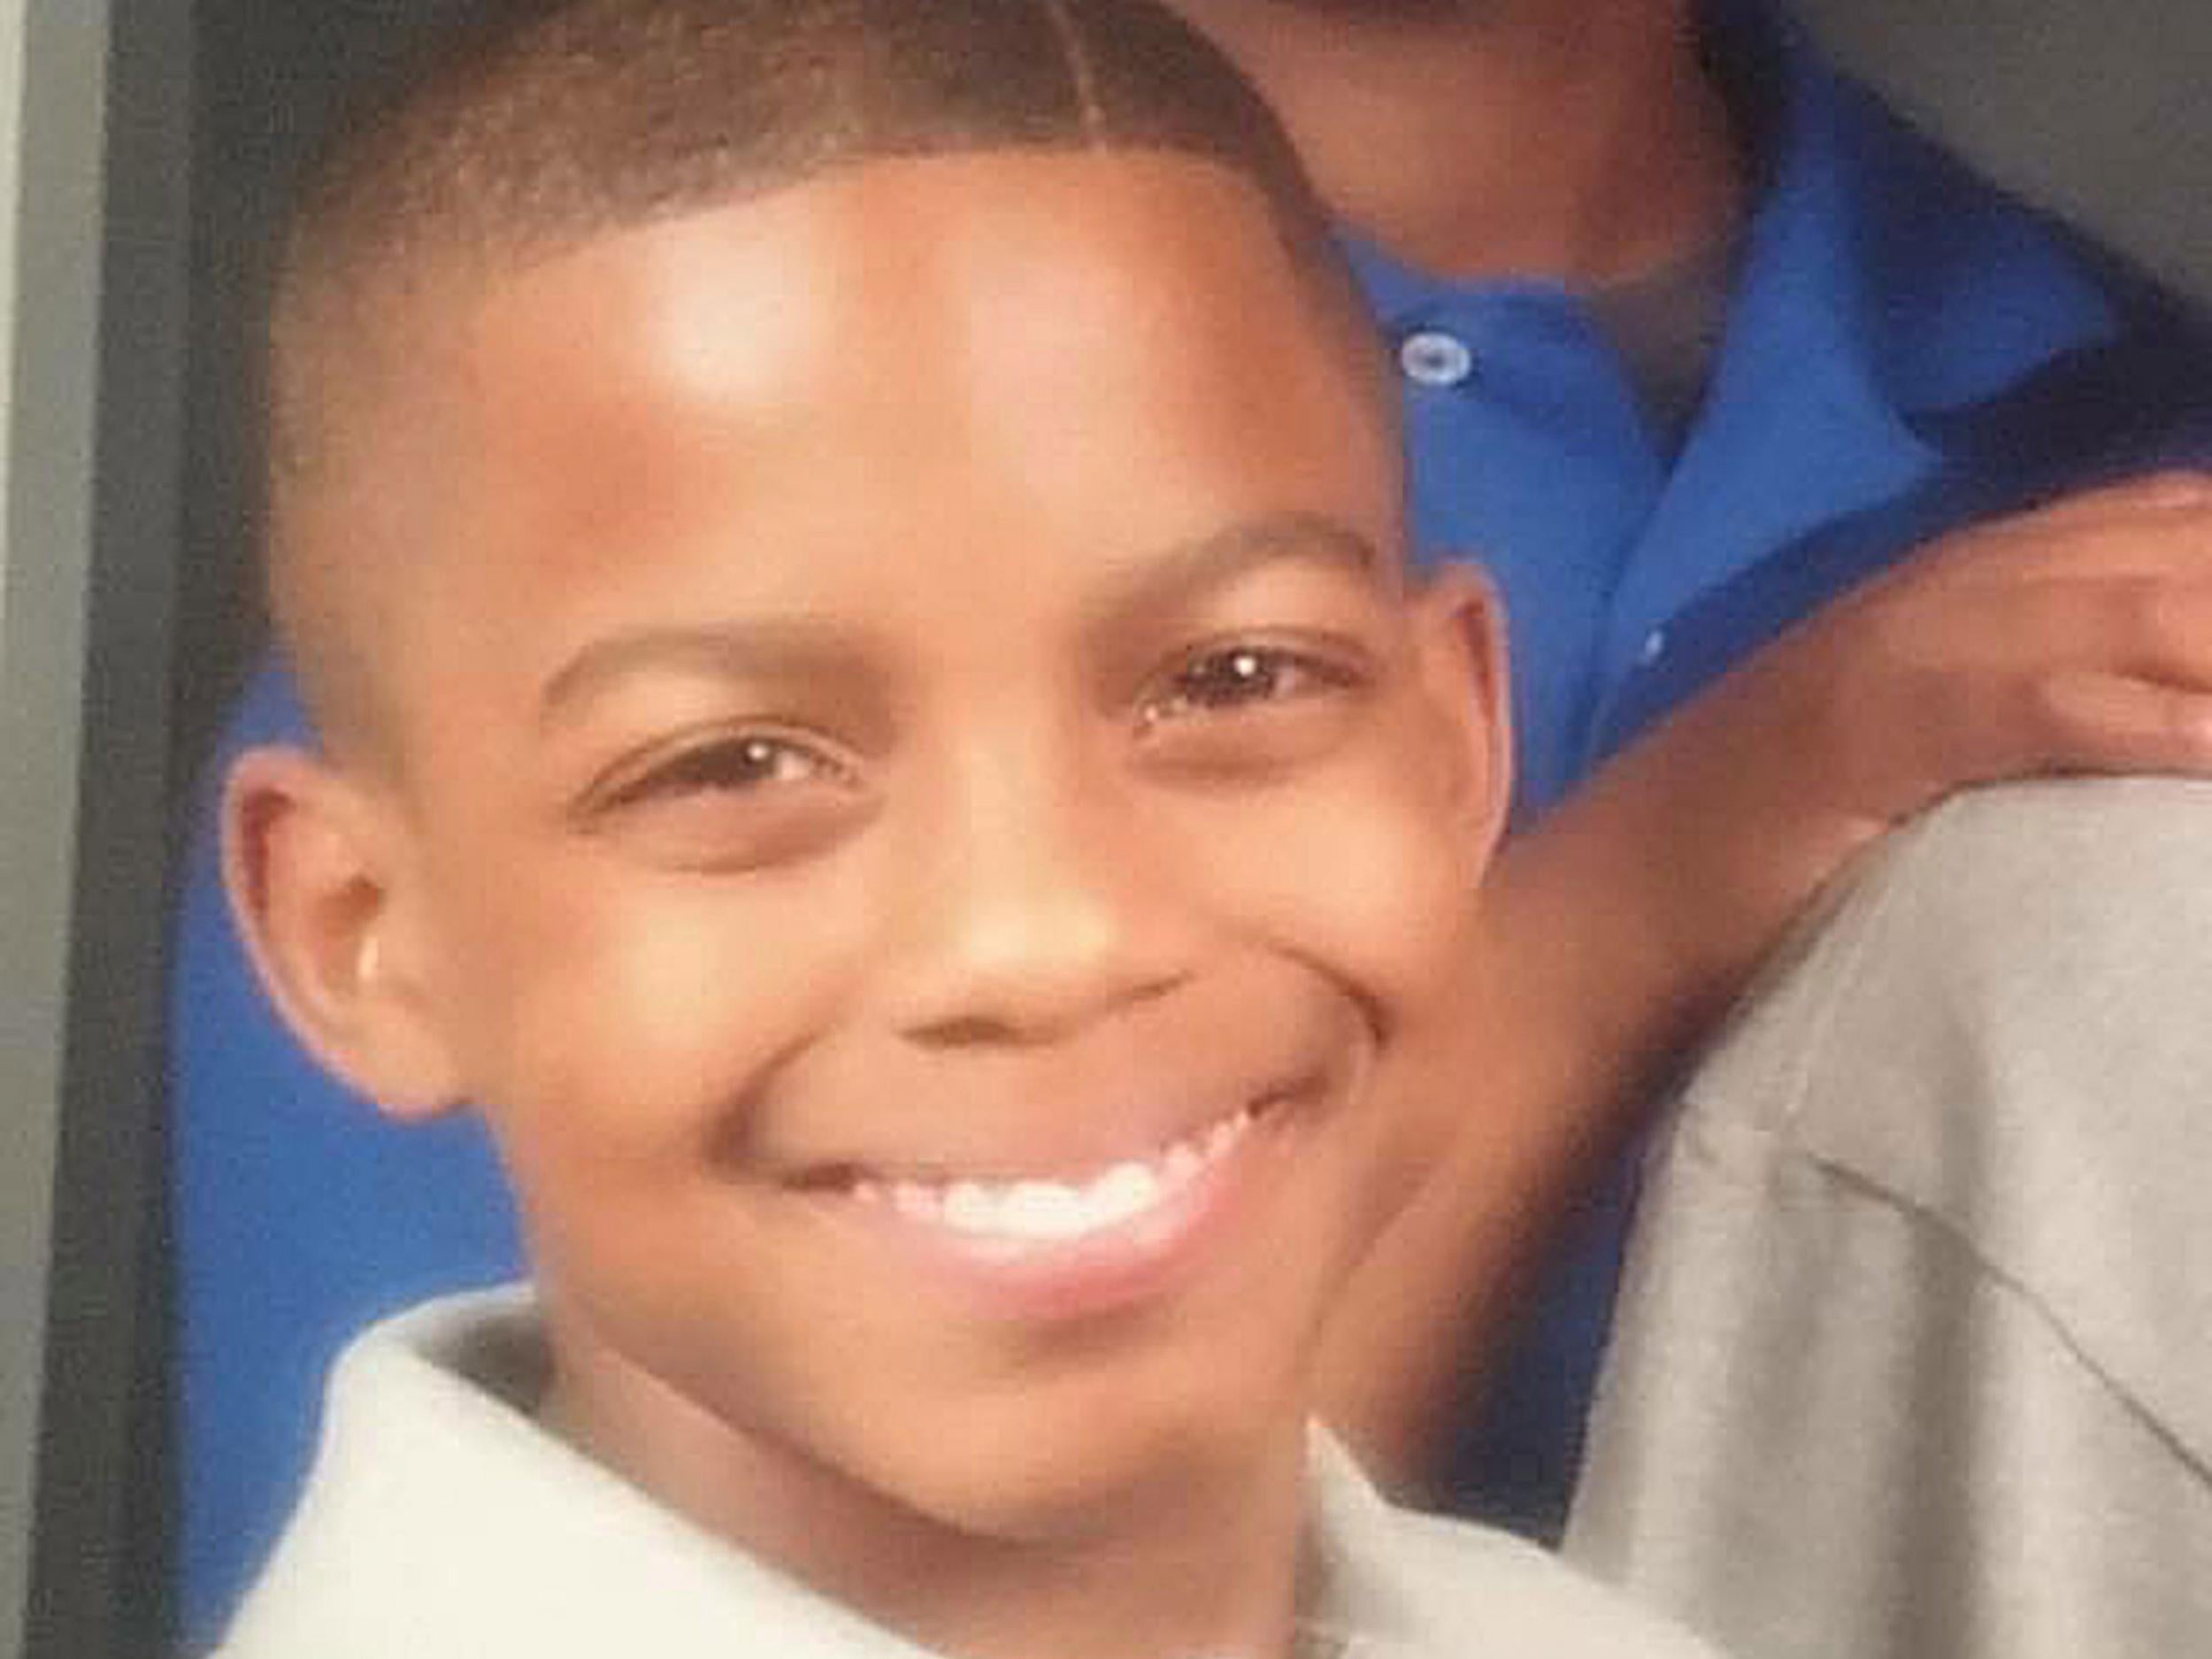 Lee Merritt became close to the family of 15-year-old Jordan Edwards, who was shot and killed by a Texas police officer in 2017